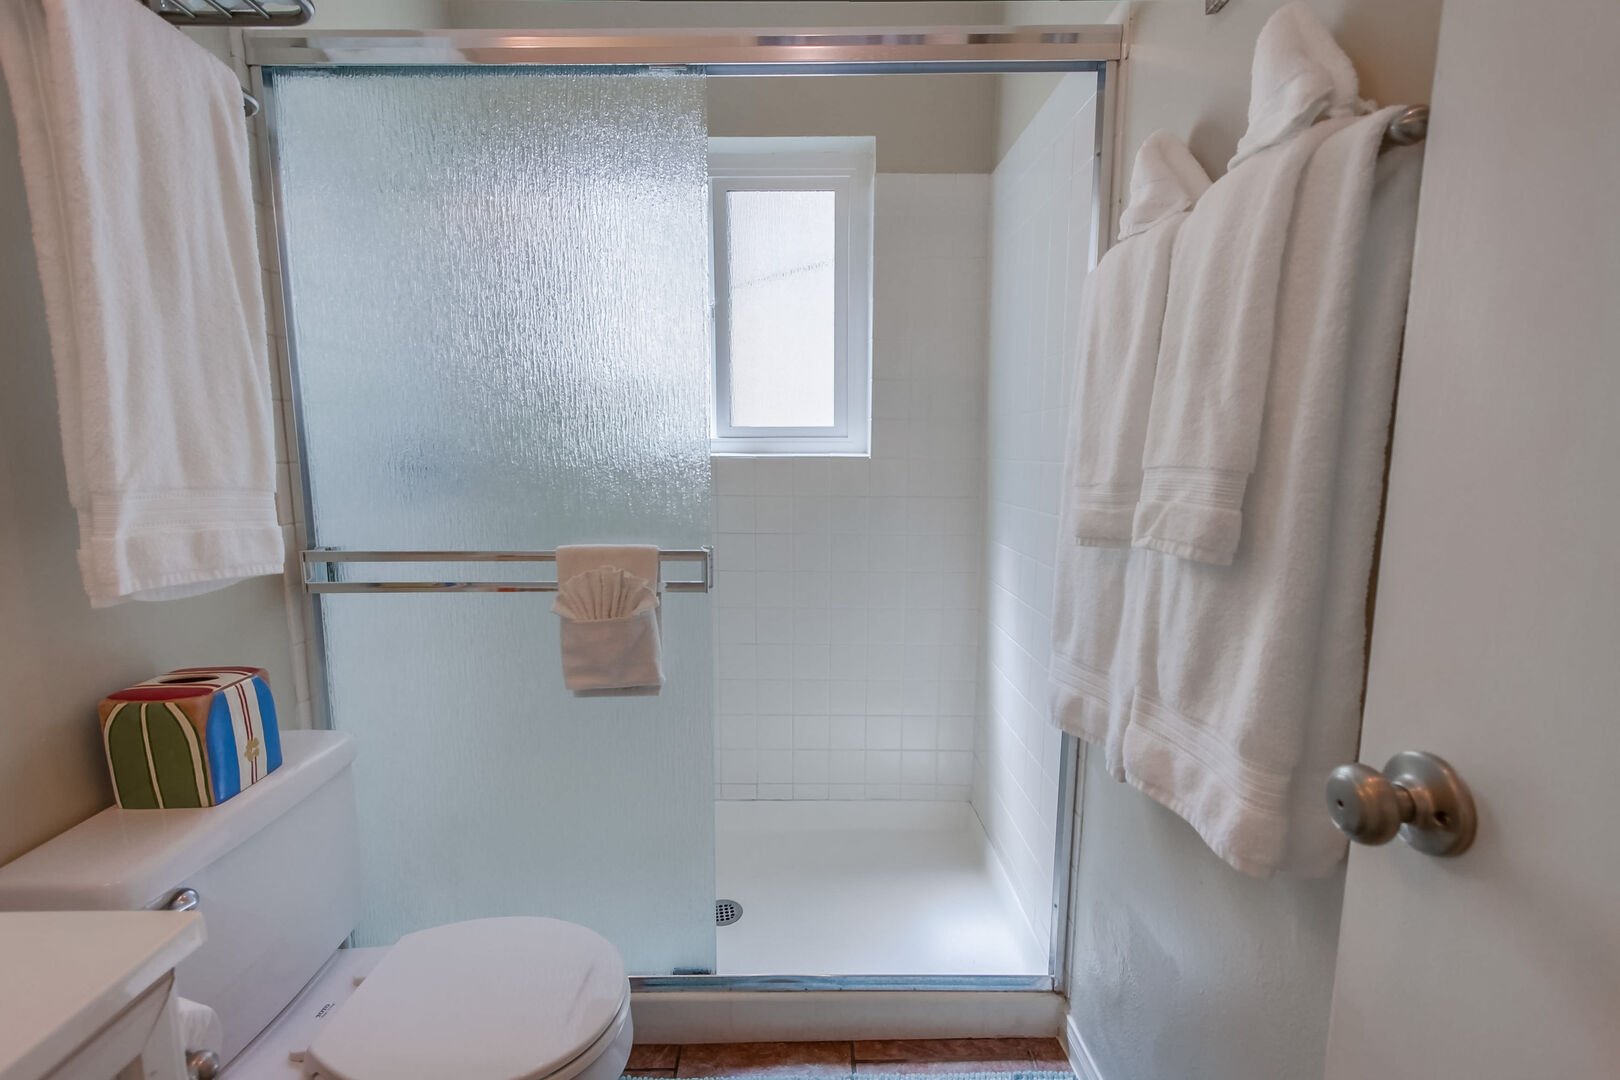 Shared bathroom with walk-in shower